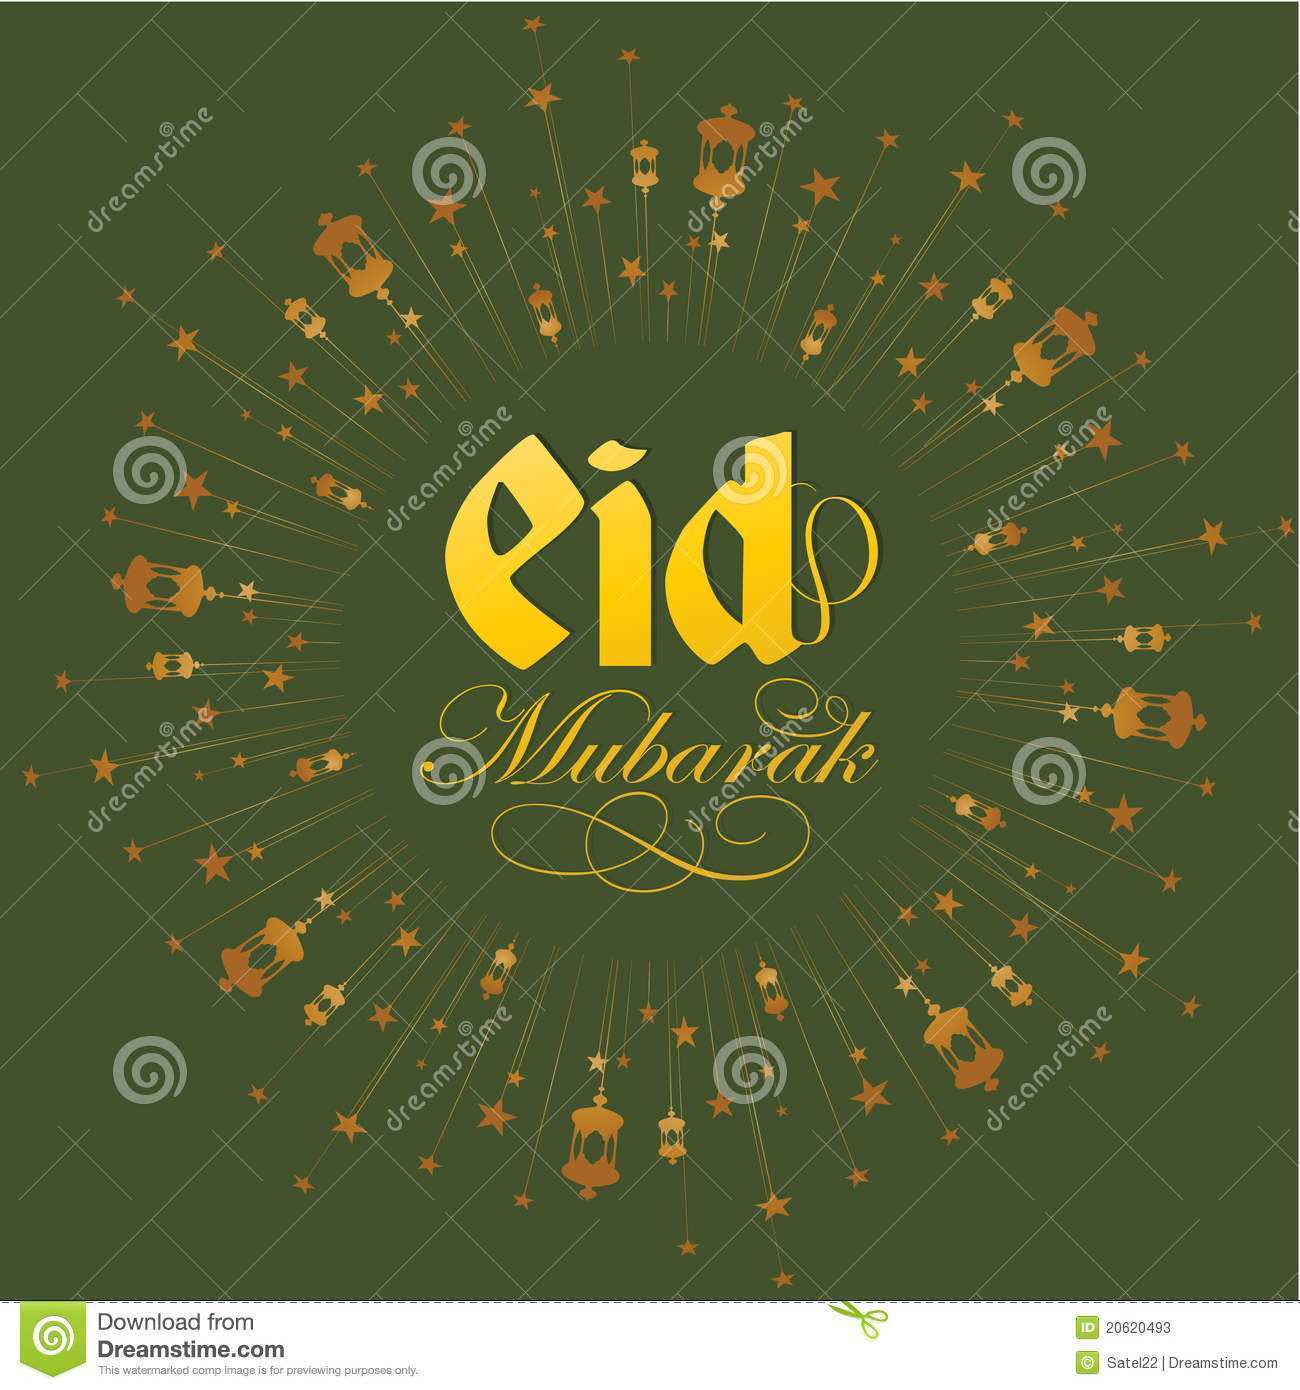 13 Format Eid Cards Templates Free Download in Word with Eid Cards Templates Free Download